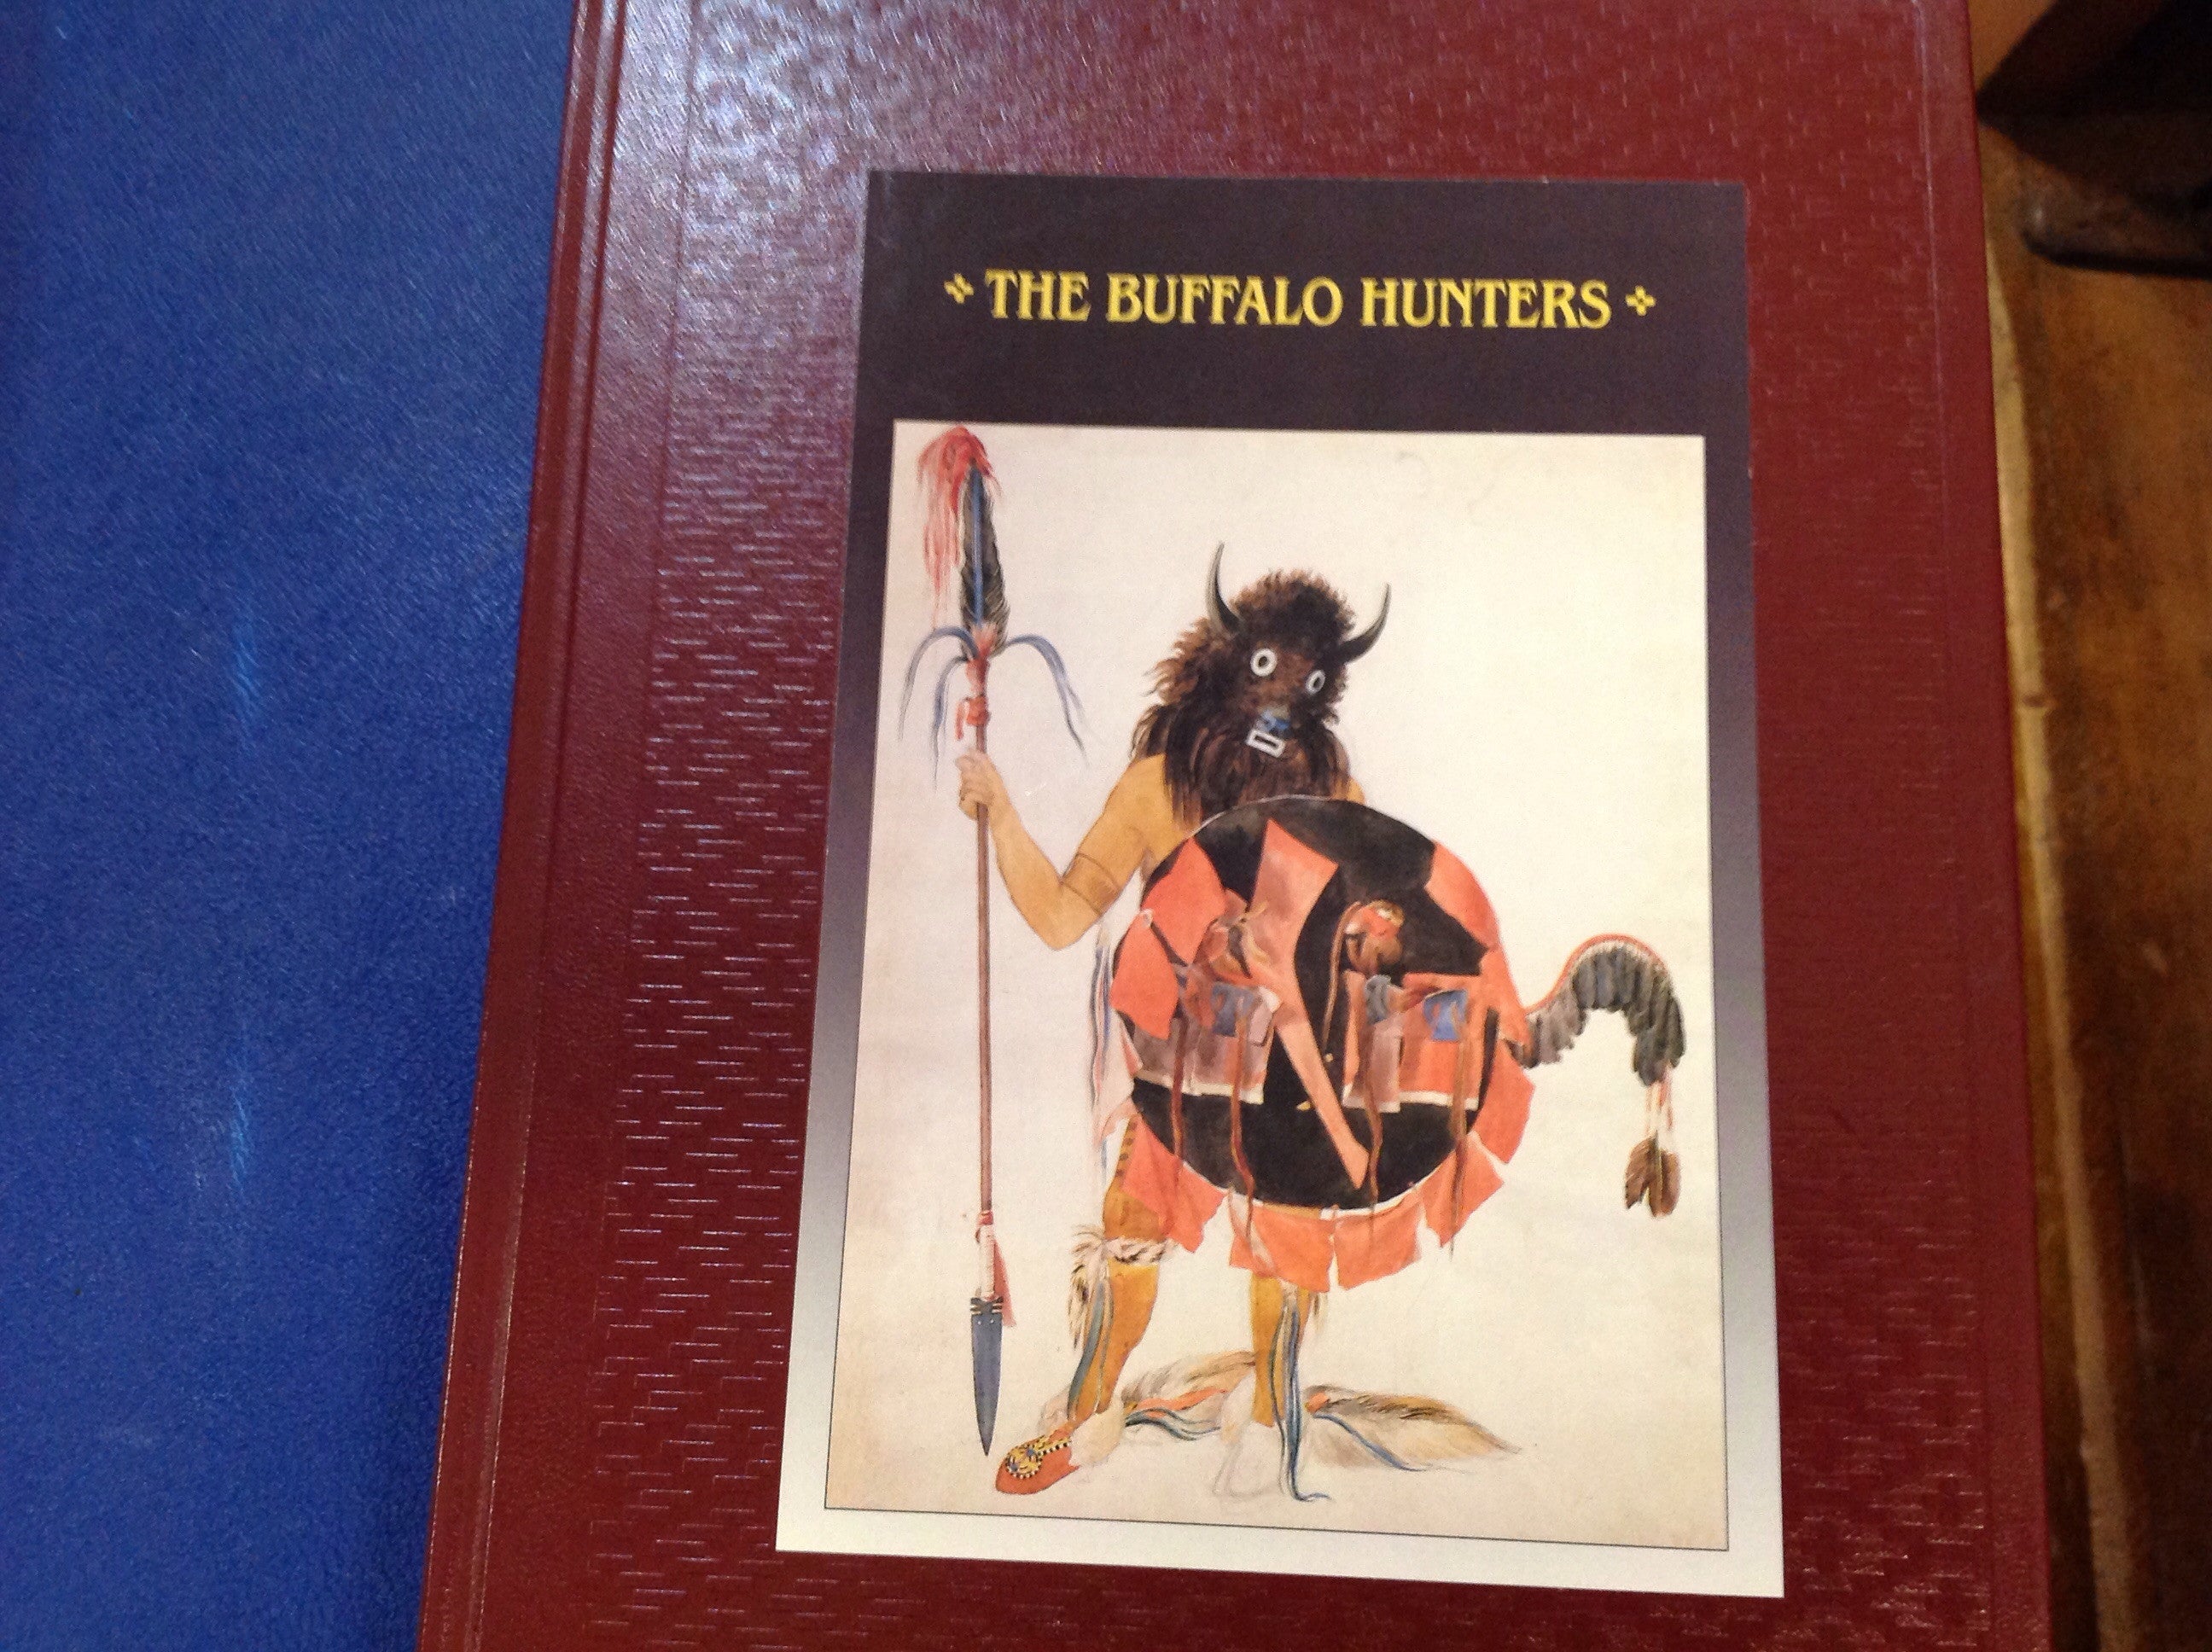 BOOKS - The Buffalo Hunters: The American Indians